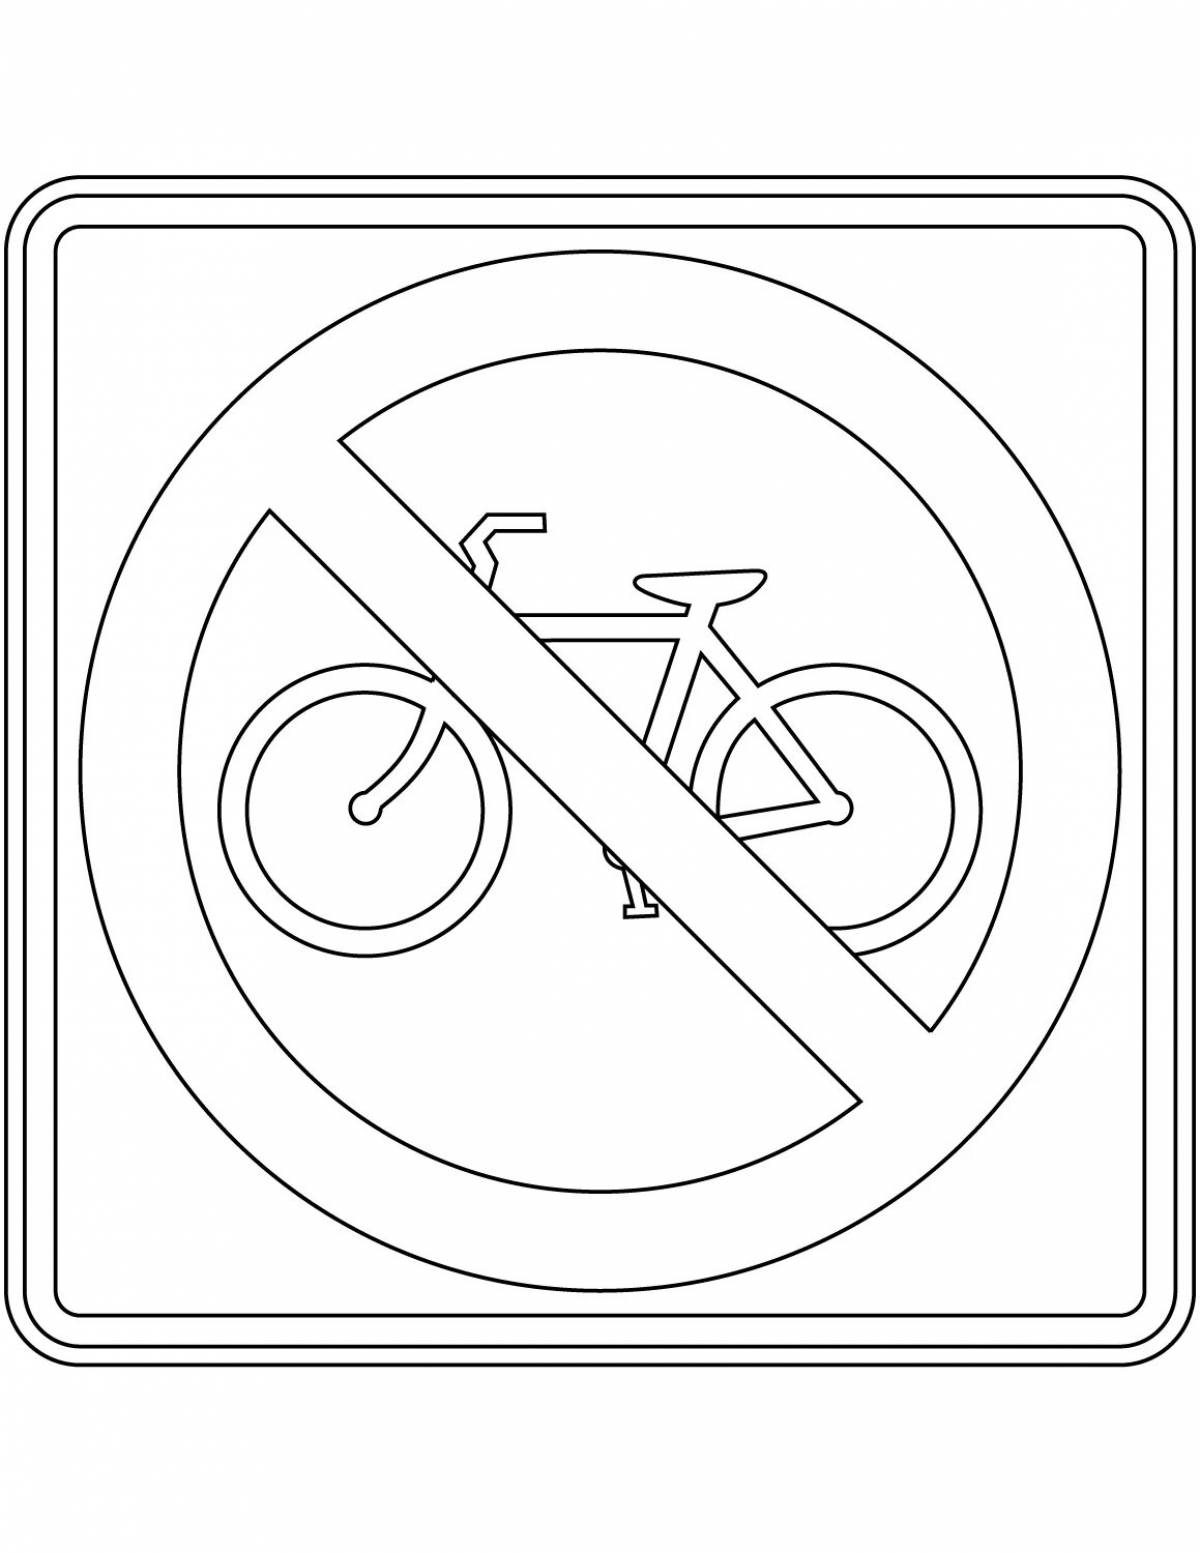 Coloring page funny sign of residential area